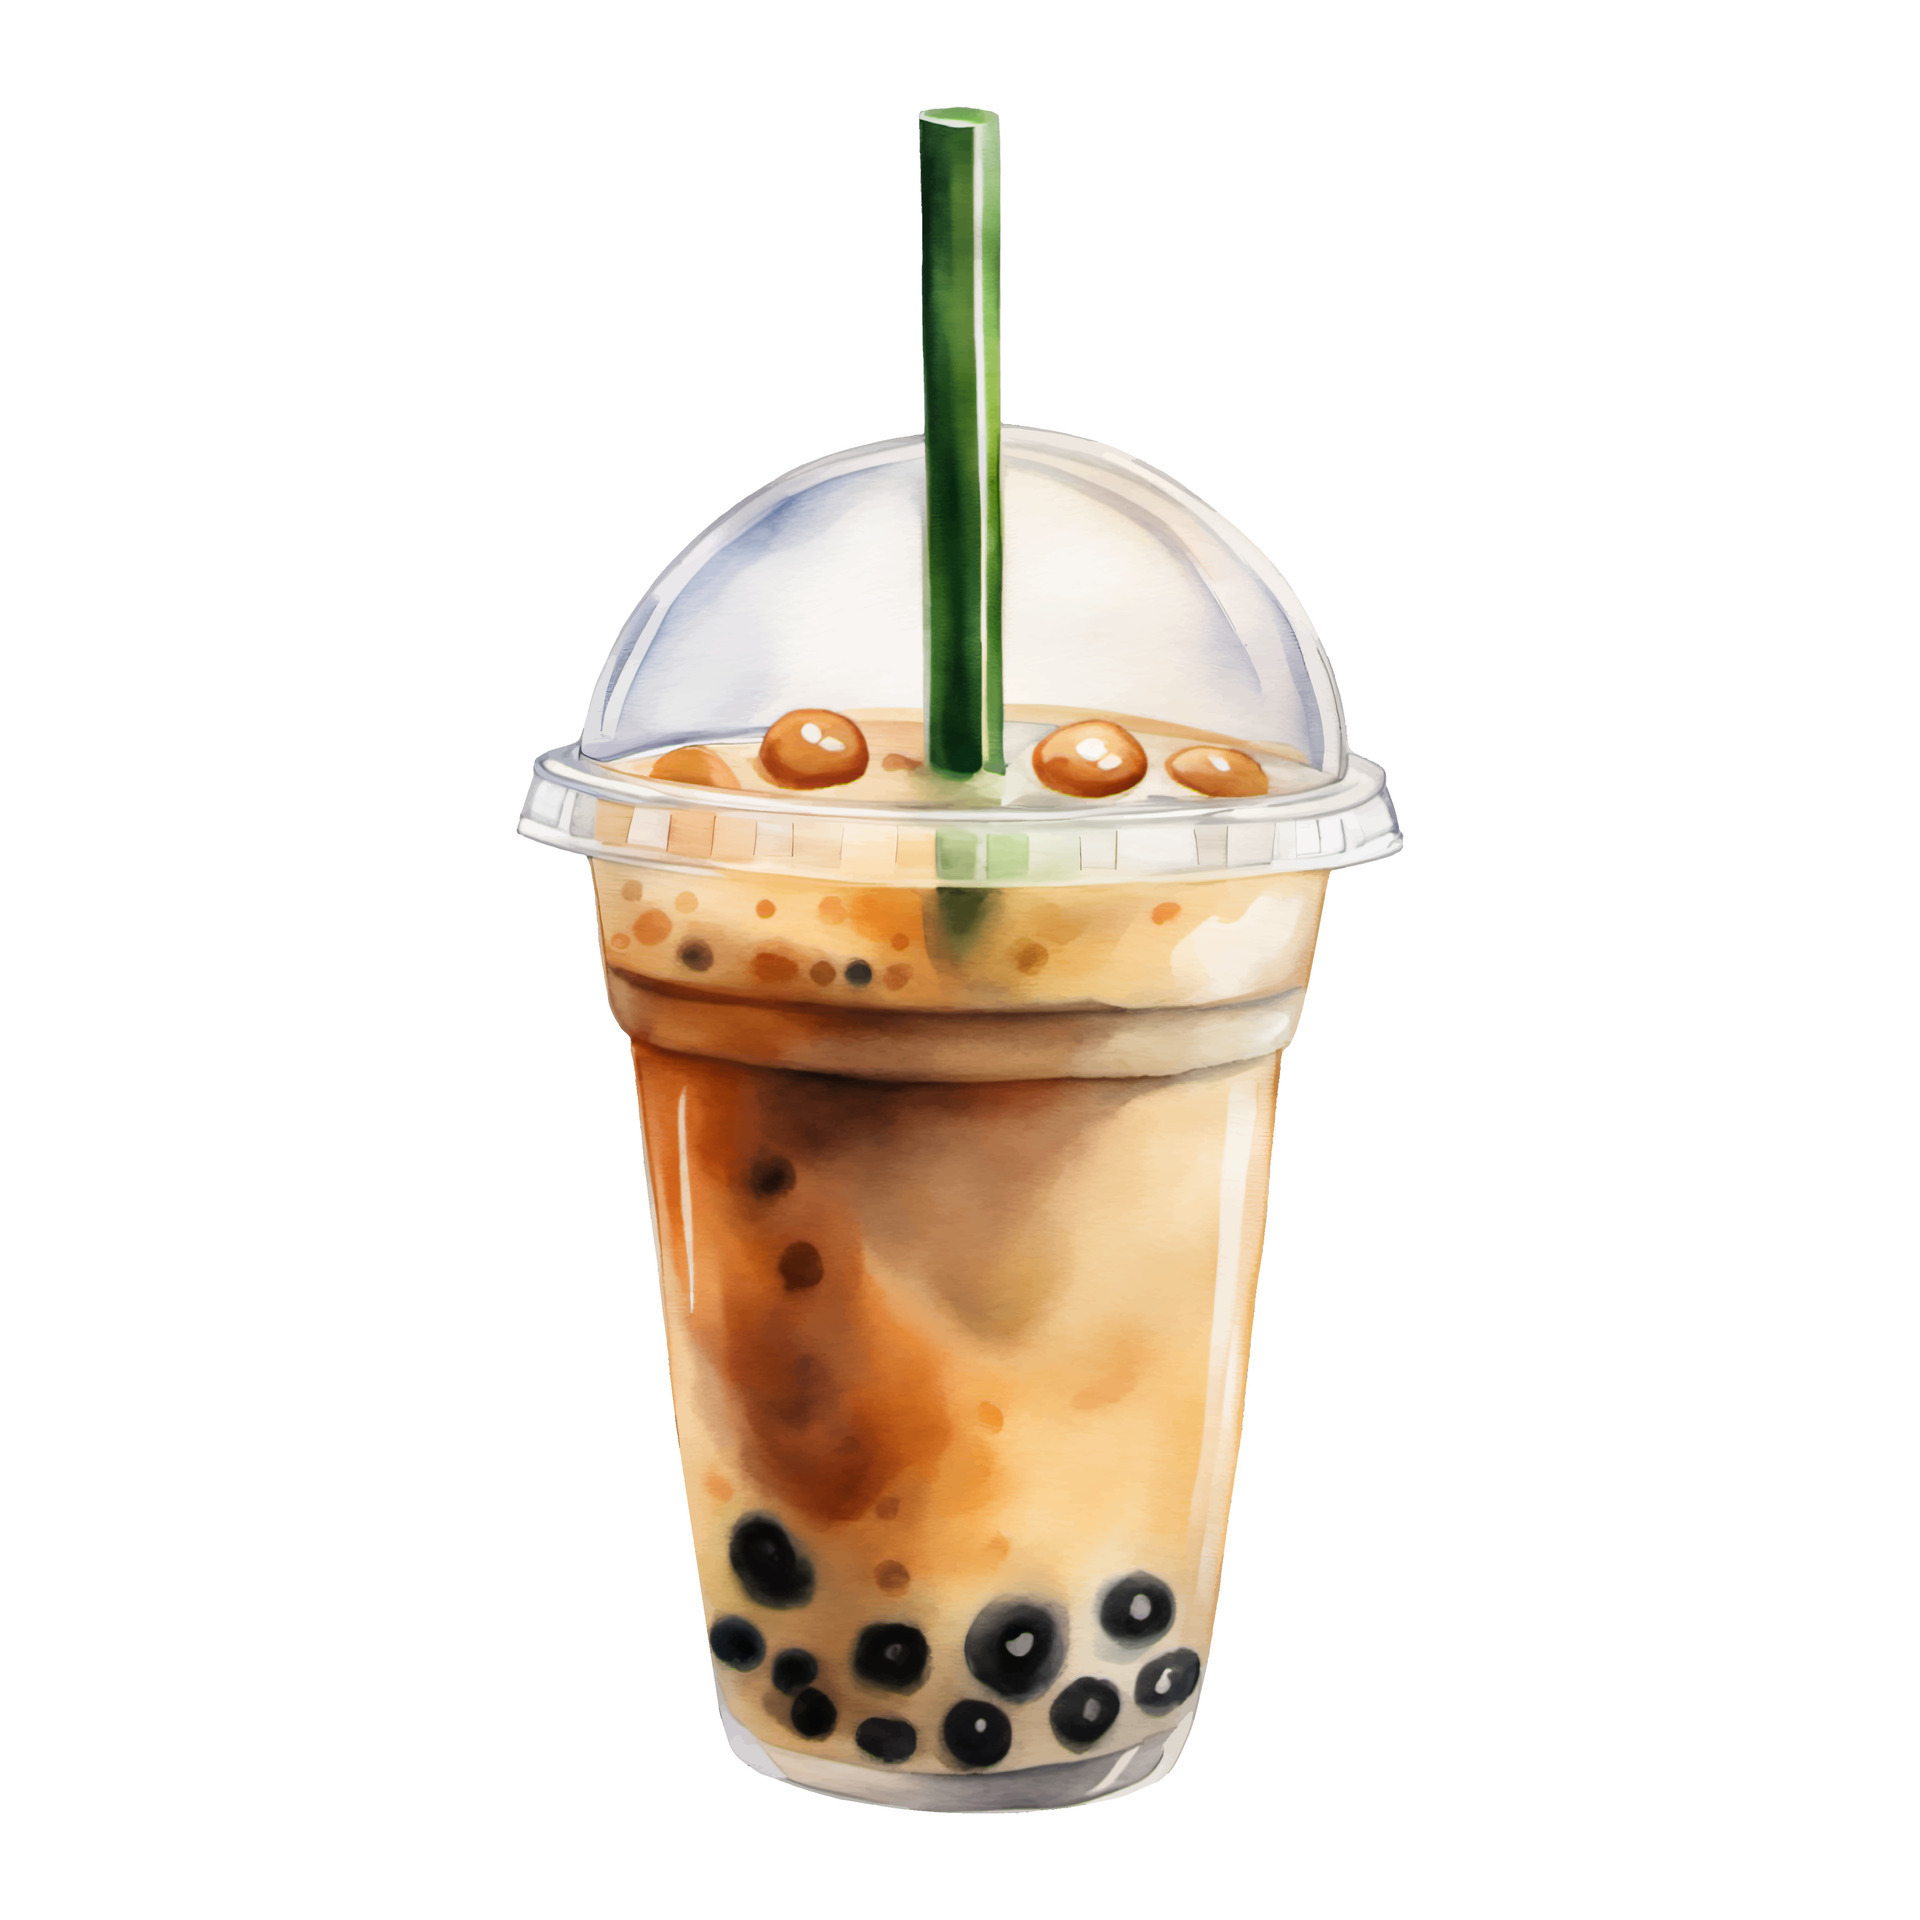 Bubble Boba Milk Tea in Plastic Glass with Straw Isolated Hand